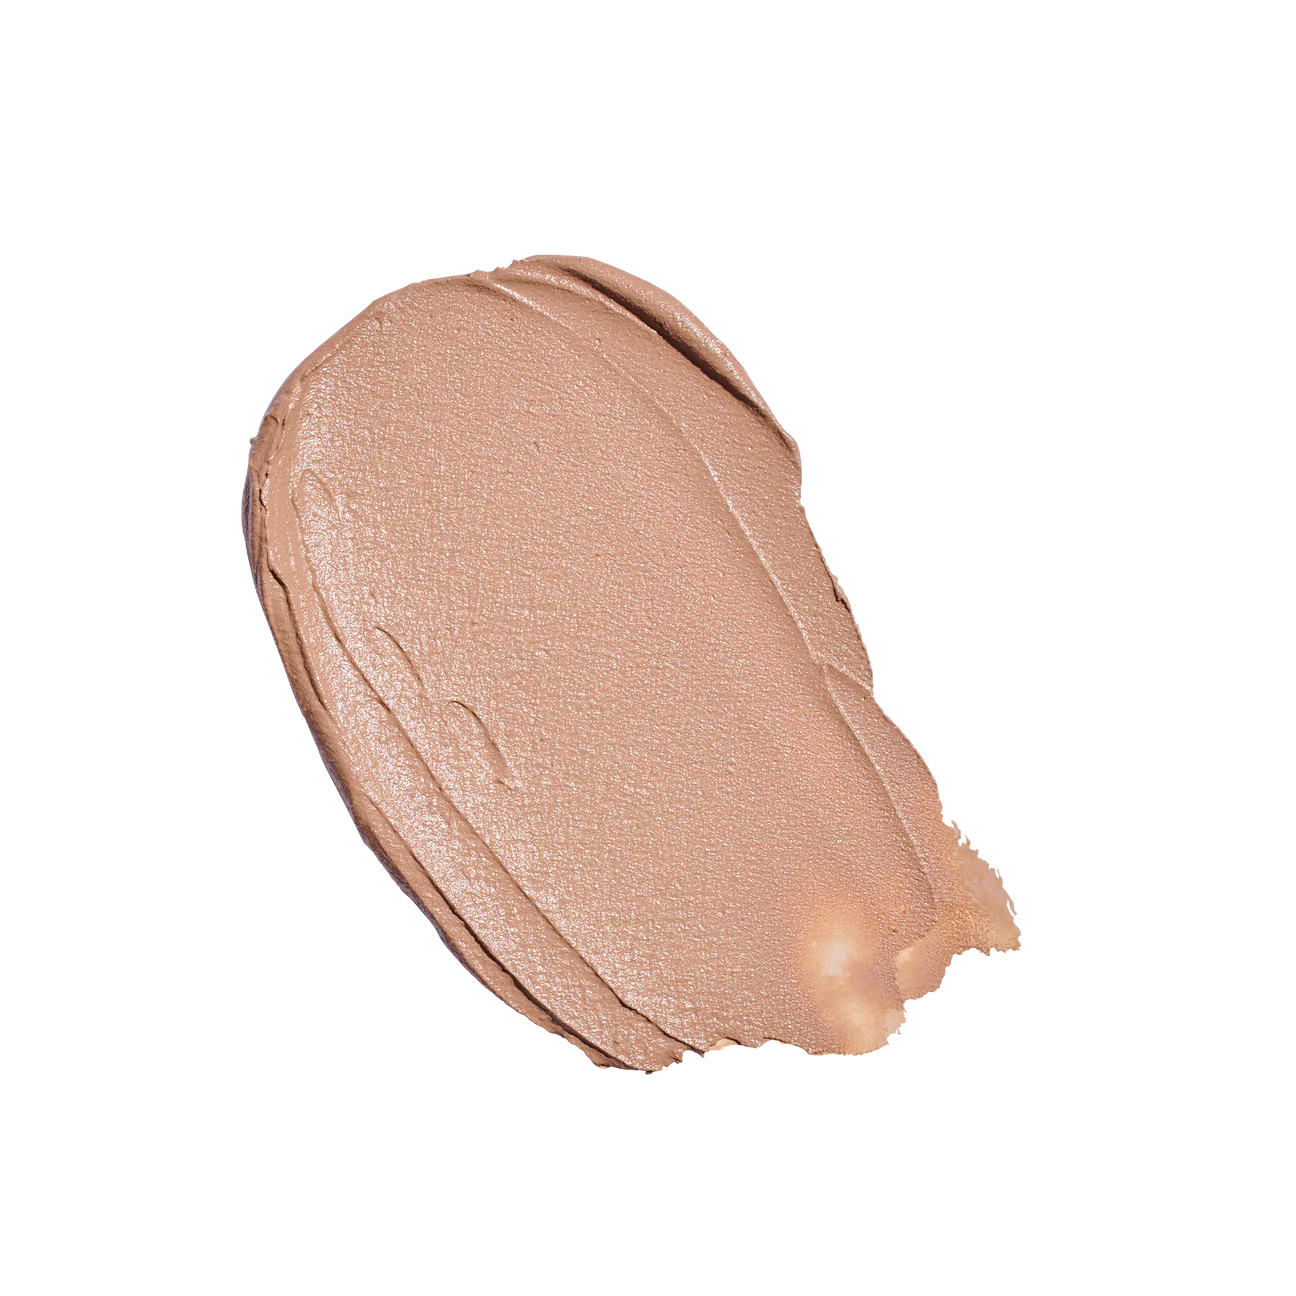 Colorescience Tint Du Soleil Whipped Mineral Foundation SPF 30 in Tan